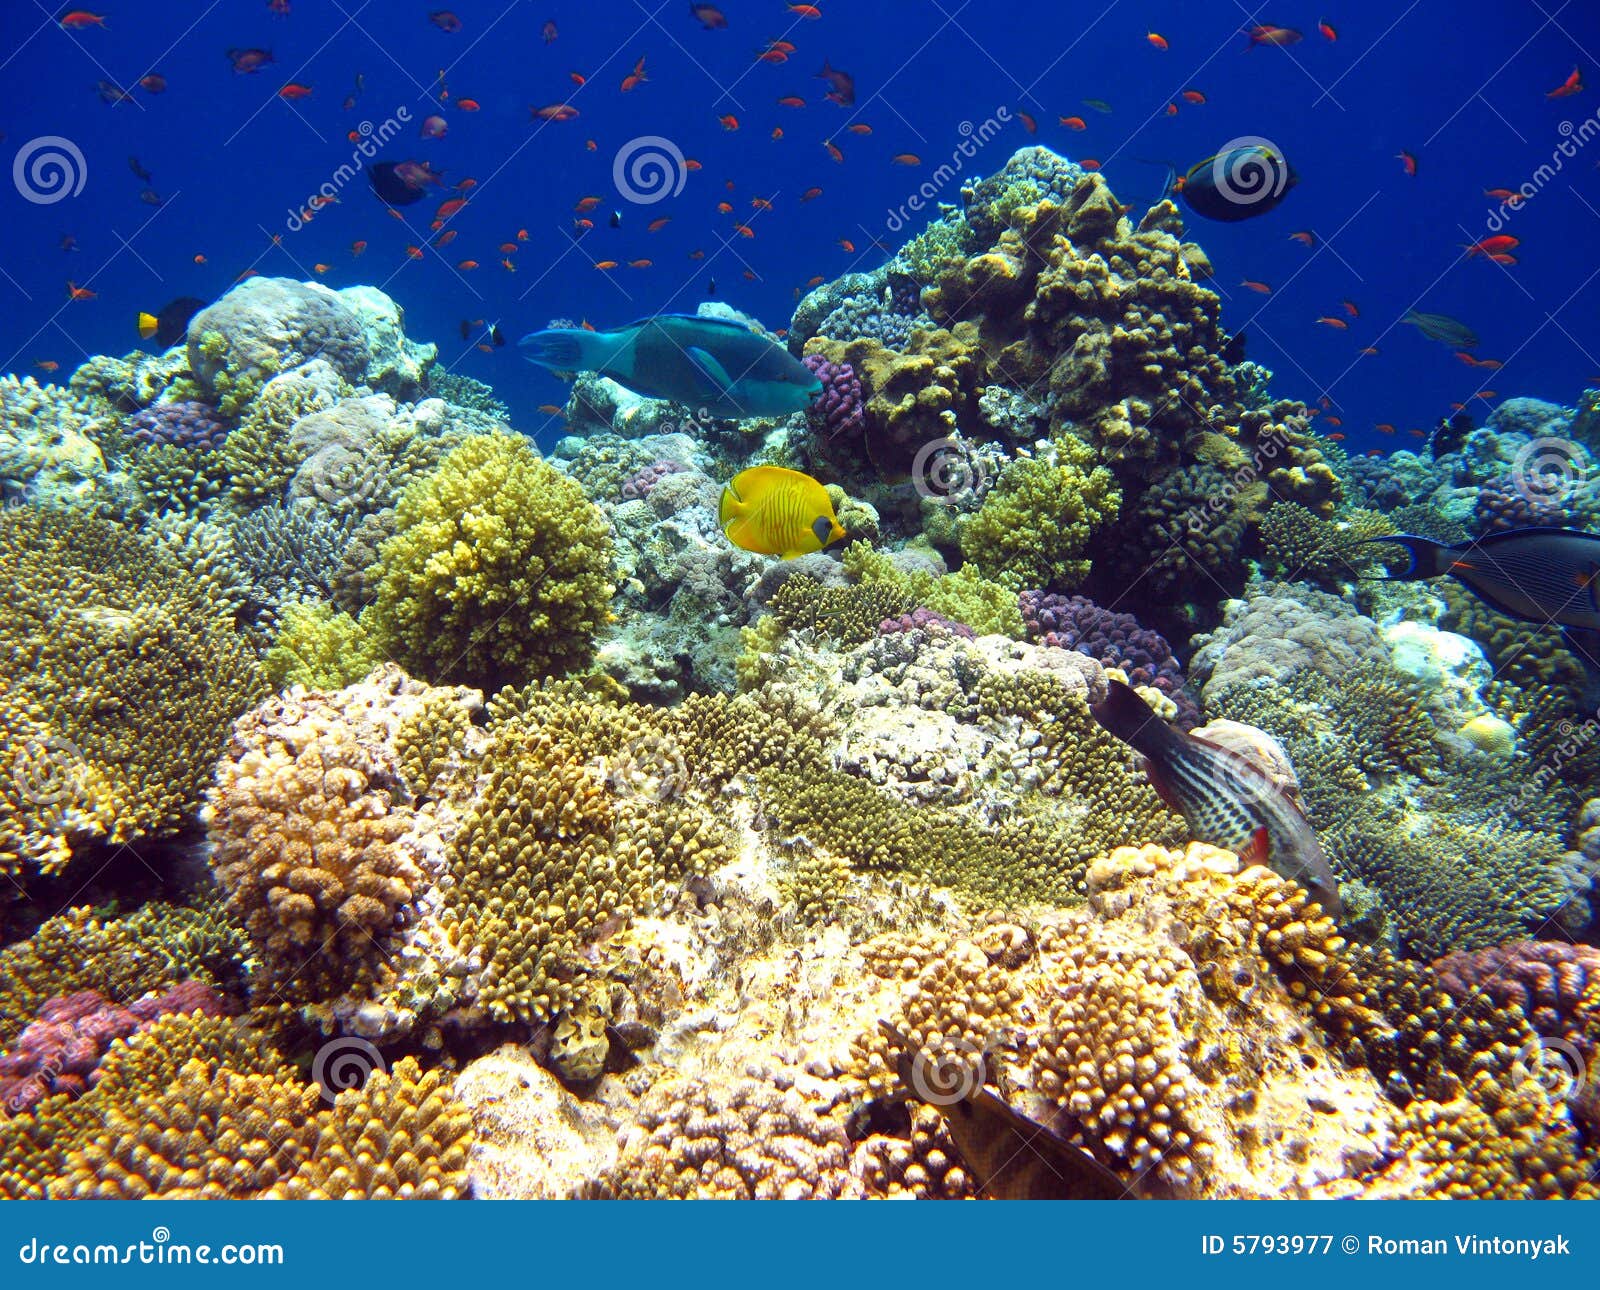 Tropical Coral Reef in Red Sea Stock Image - Image of summer, nature ...